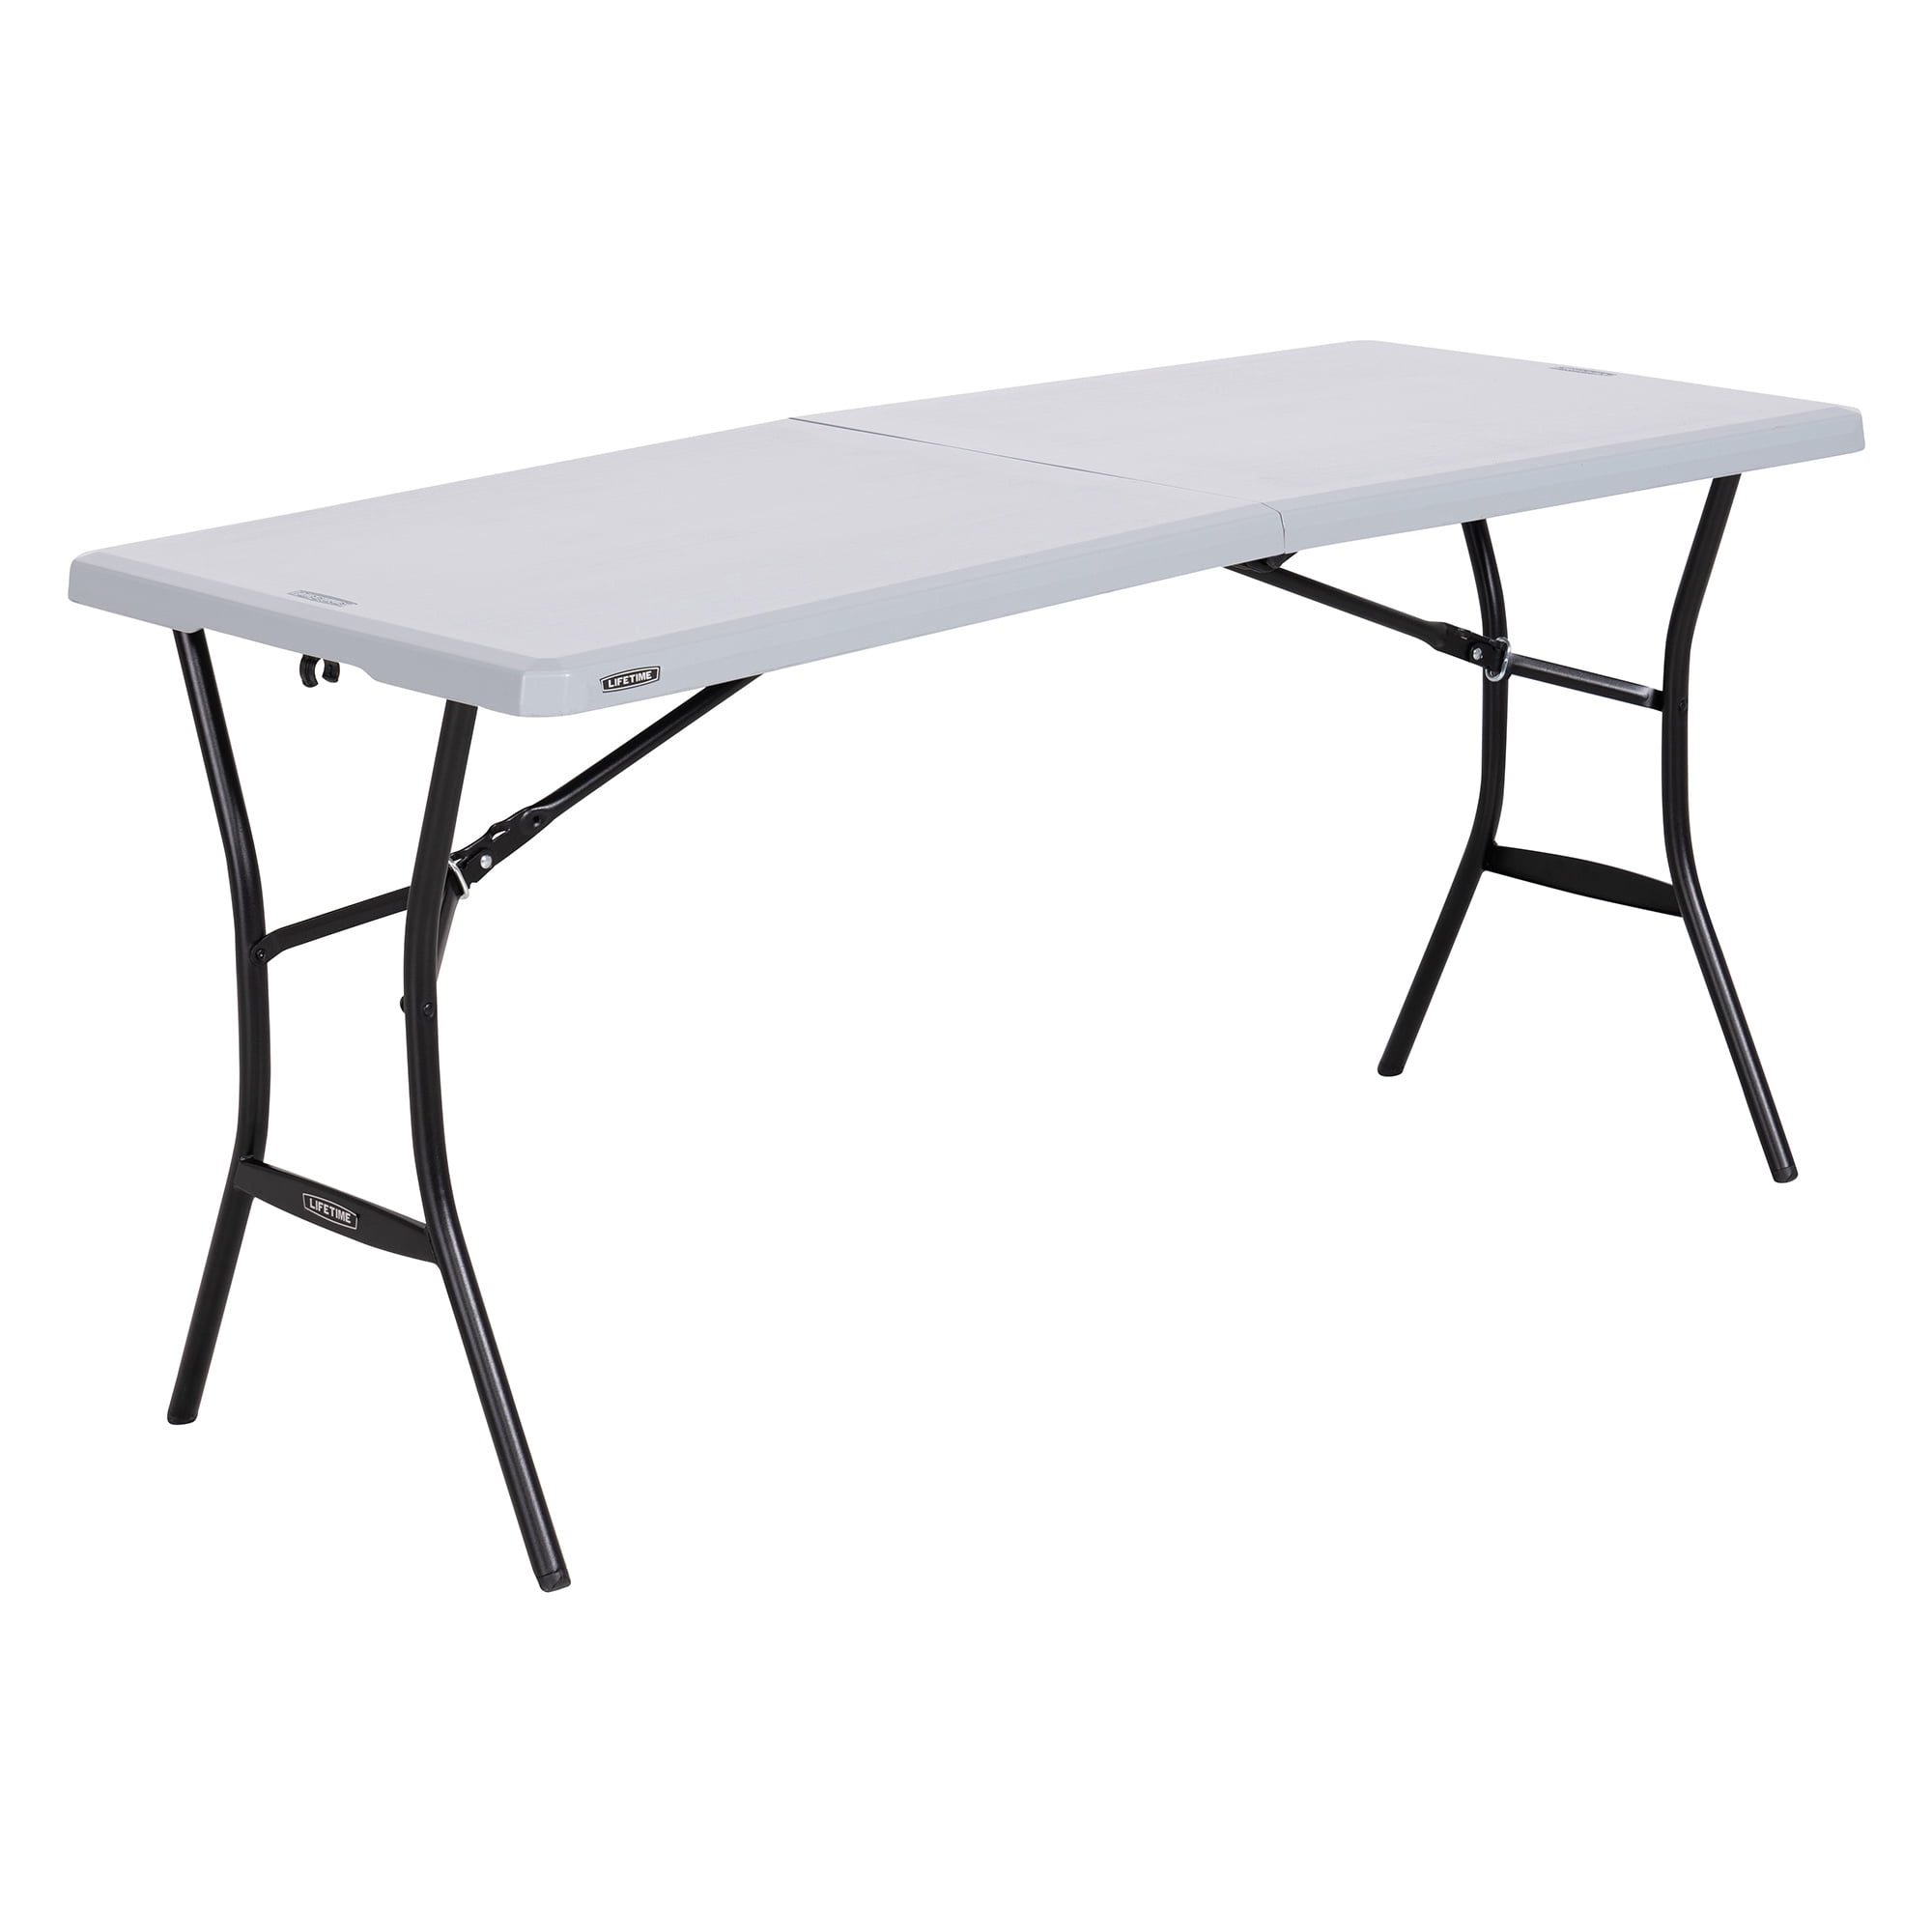 Lifetime 5ft Folding Tailgating Camping And Outdoor Table